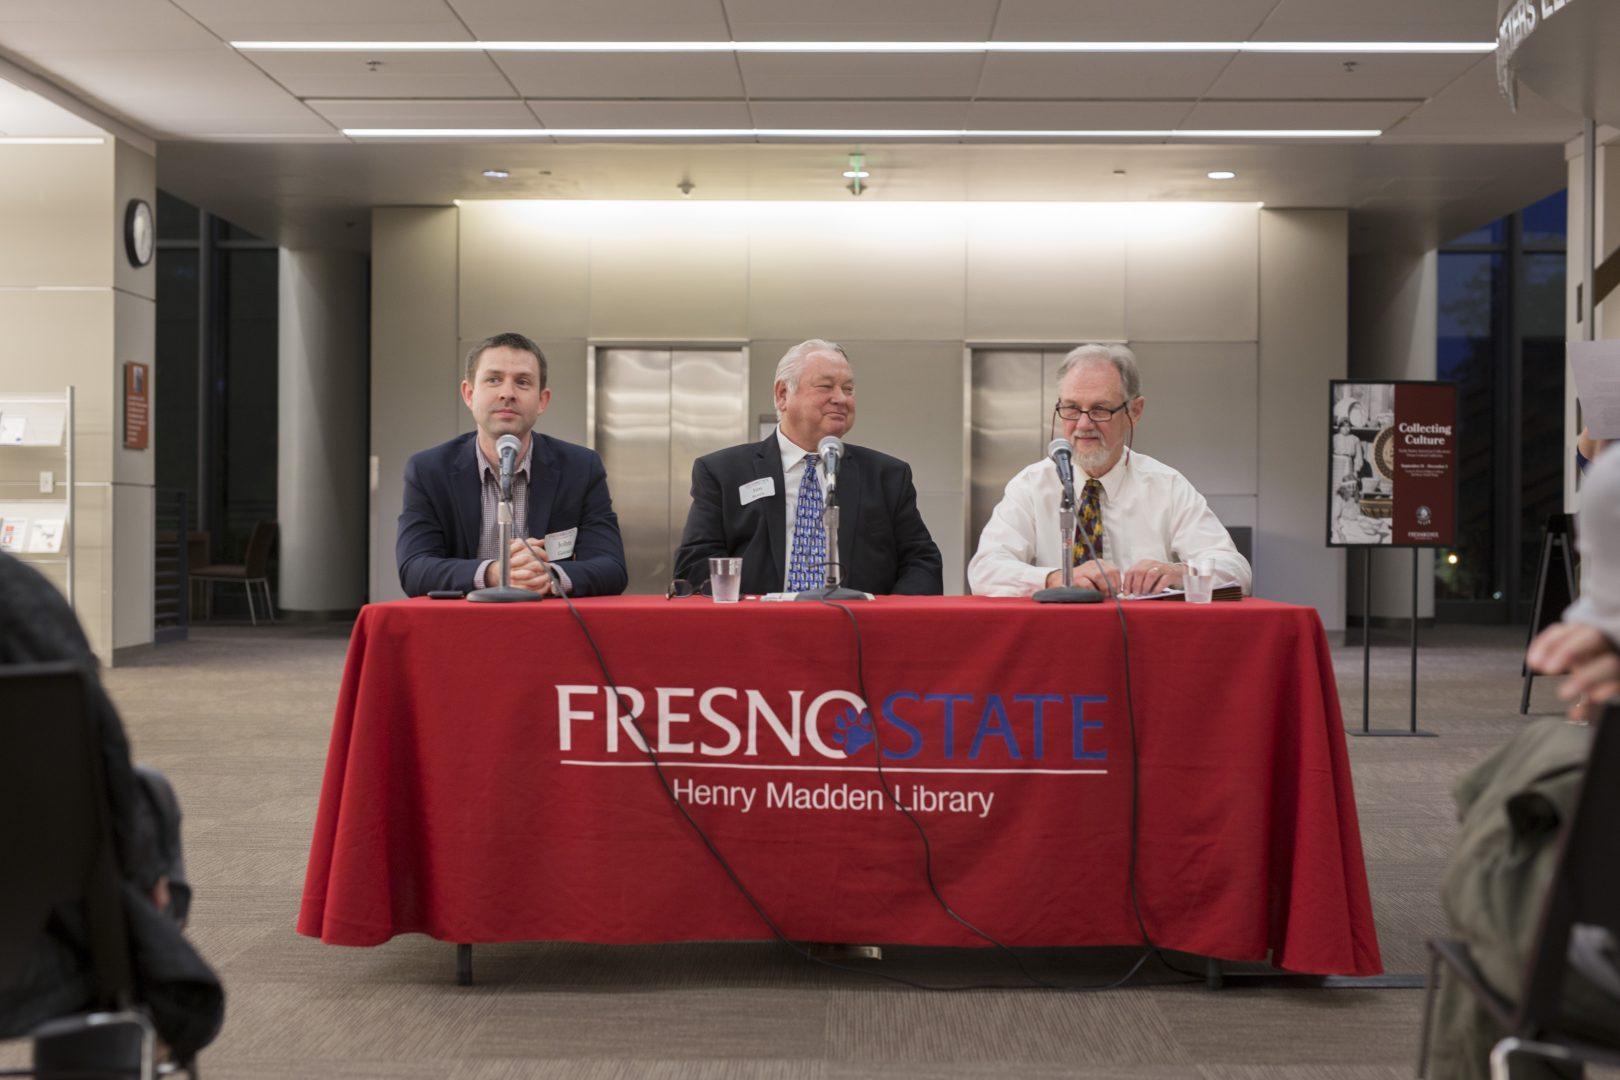 Jim Boren (center) answers questions about fake news in the Henry Madden Library on Oct. 27, 2017. Boren currently serves as the executive director for the Institute for Media and Public Trust. (Daniel Avalos/The Collegian)